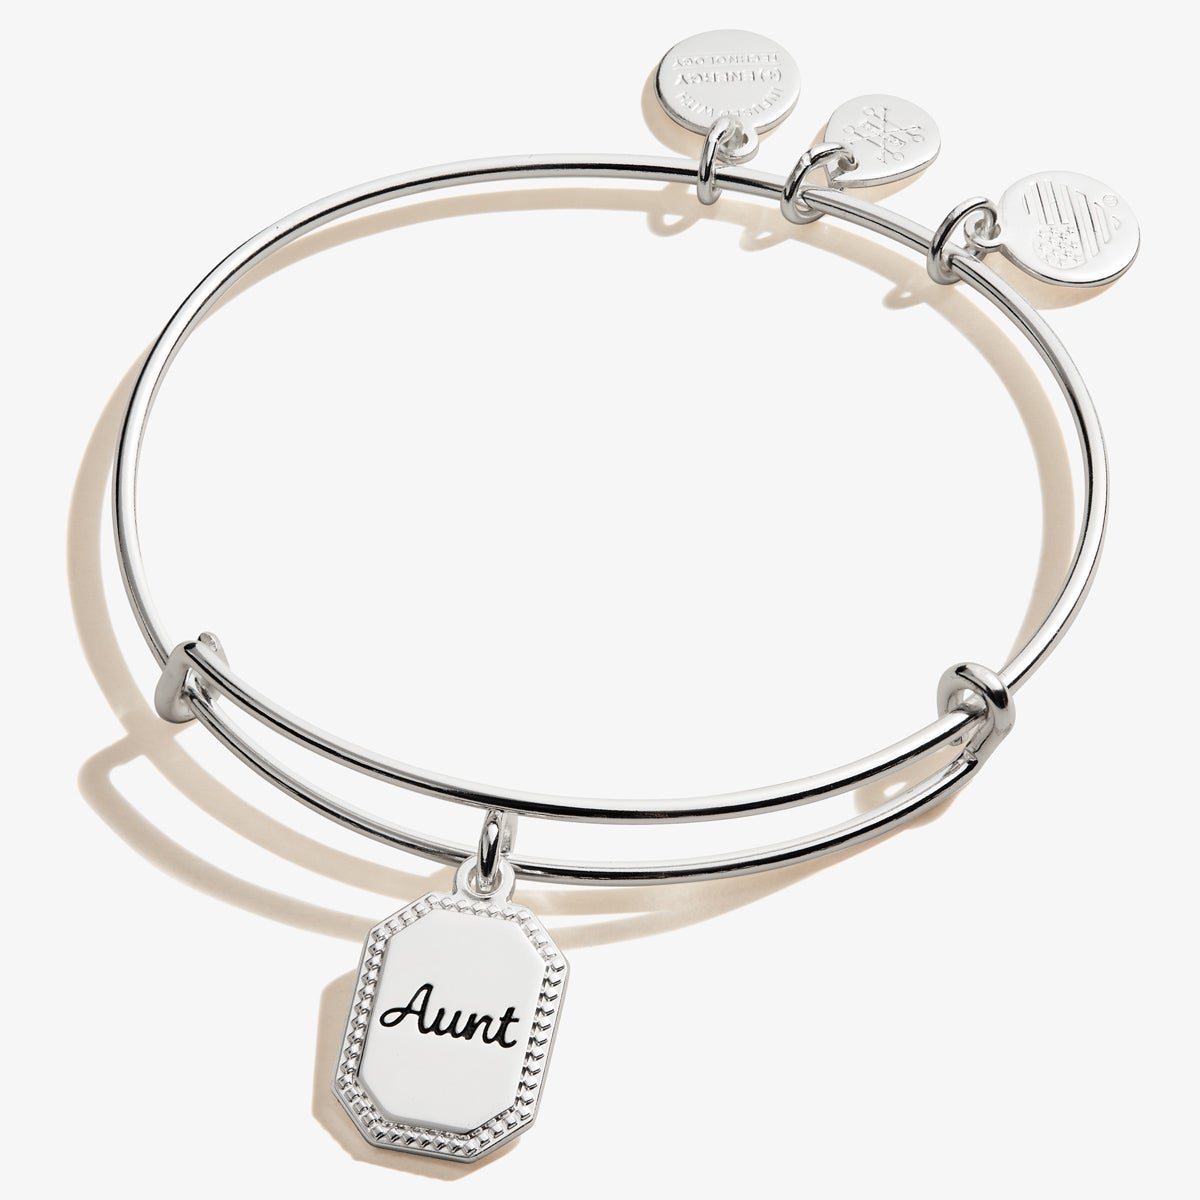 Aunt, 'Trusting Guide' Charm Bangle